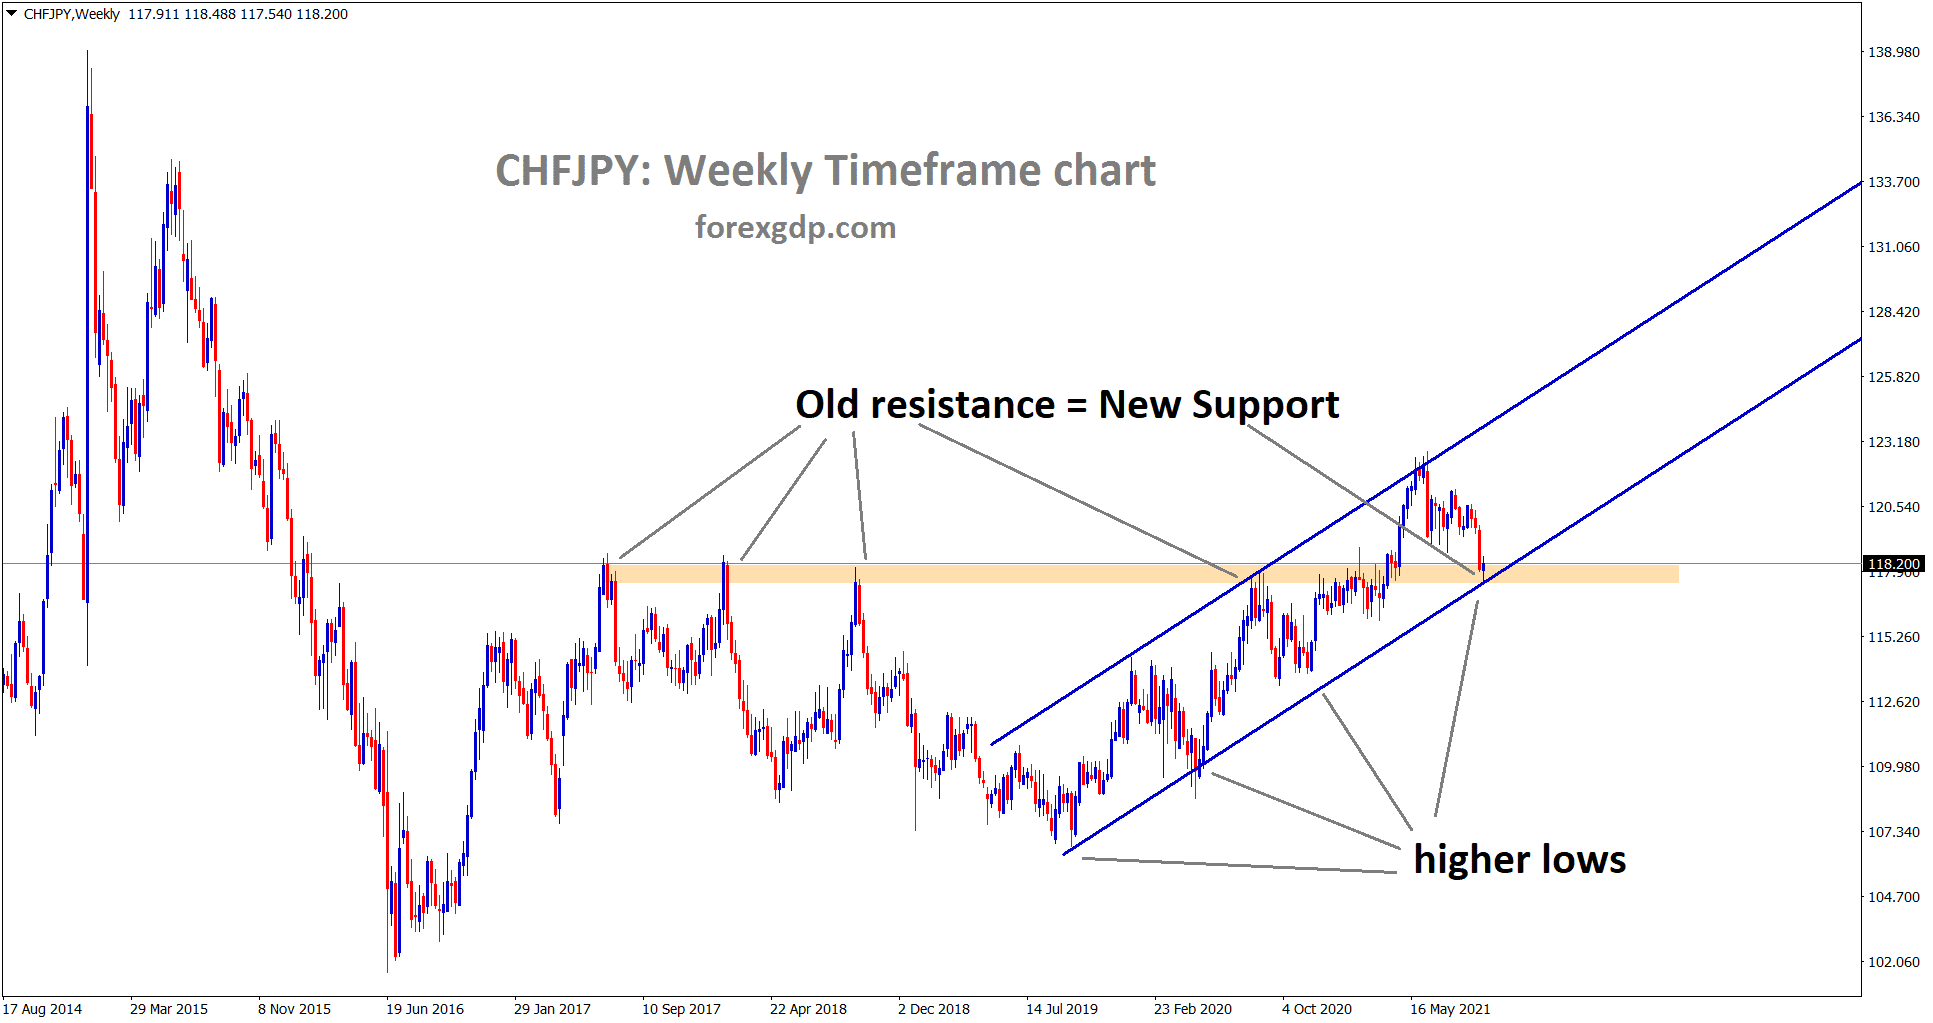 CHFJPY is standing now at the Old resistance which may have